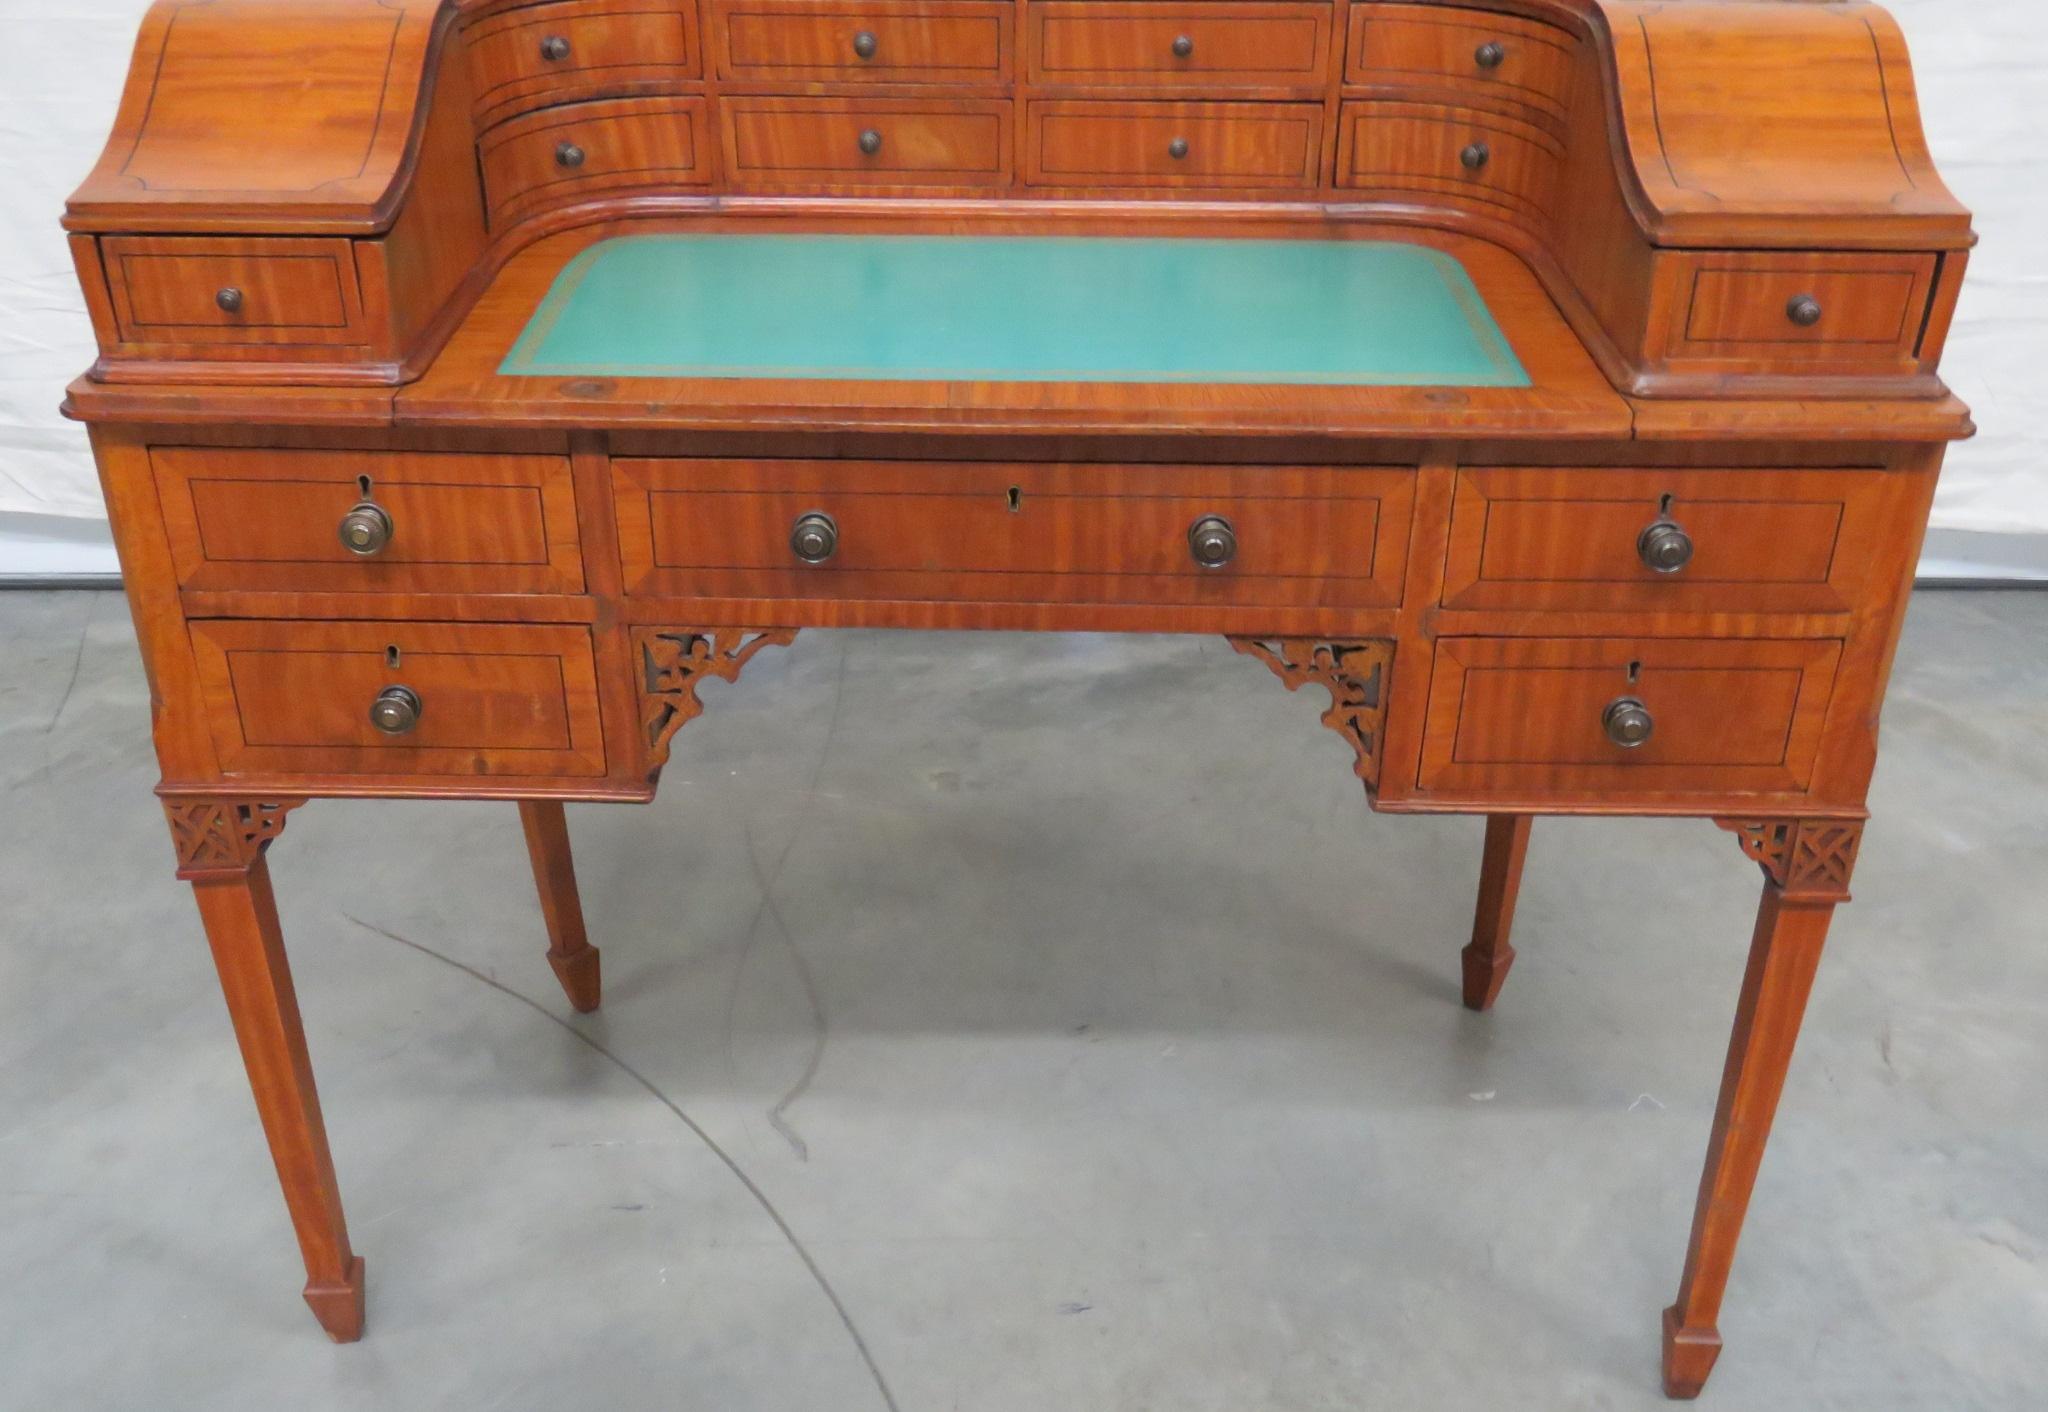 Edwardian Carlton House satinwood leather top writing desk with double raised tier of drawers, retractable writing board and 5 lower drawers.